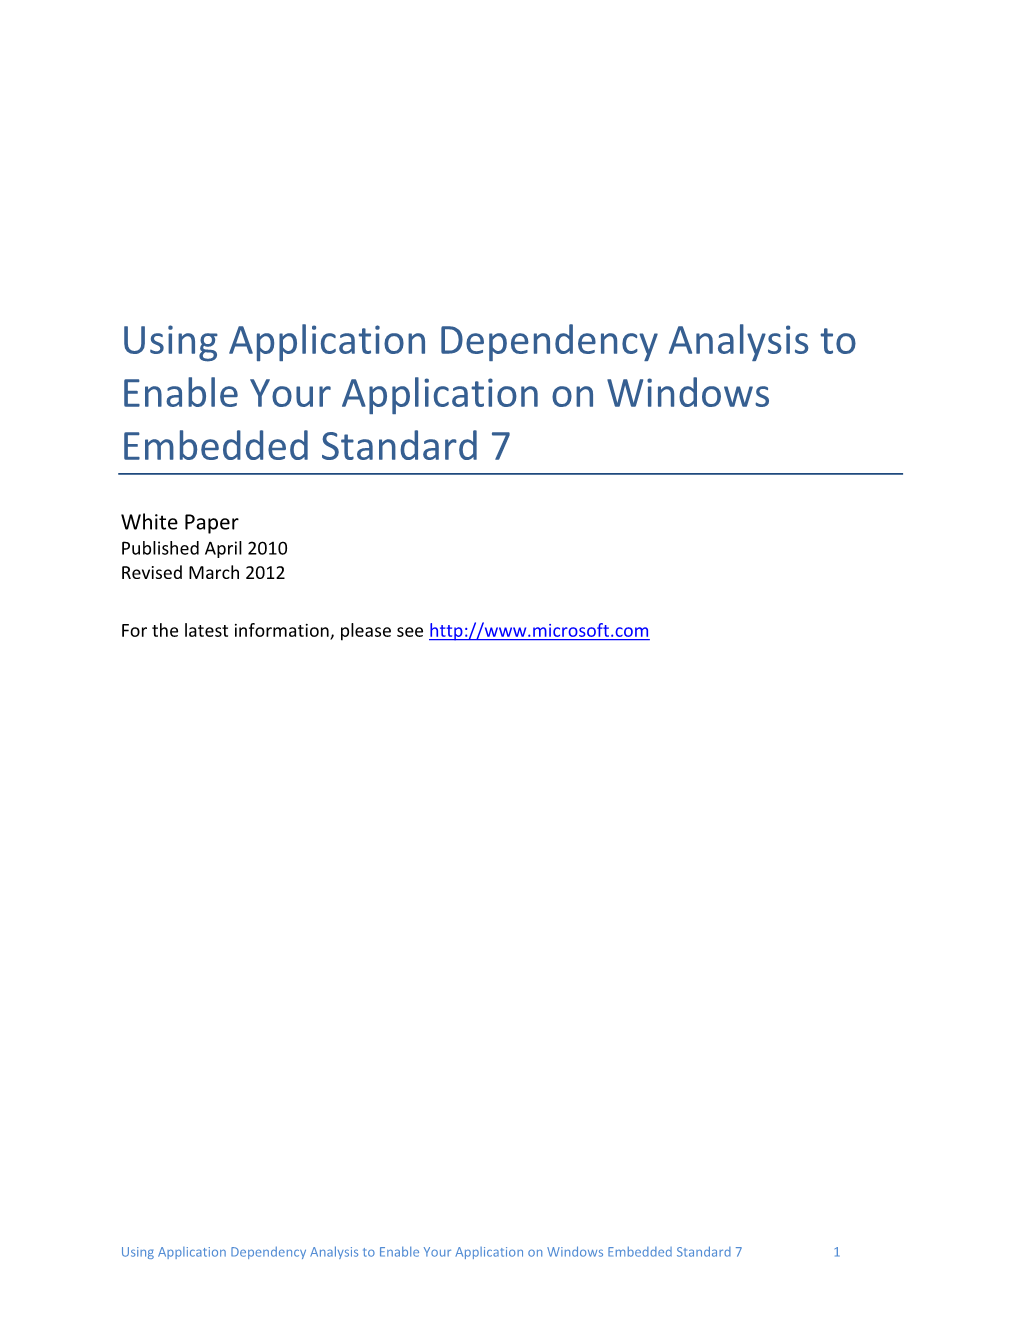 Using Application Dependency Analysis to Enable Your Application on Windows Embedded Standard 7